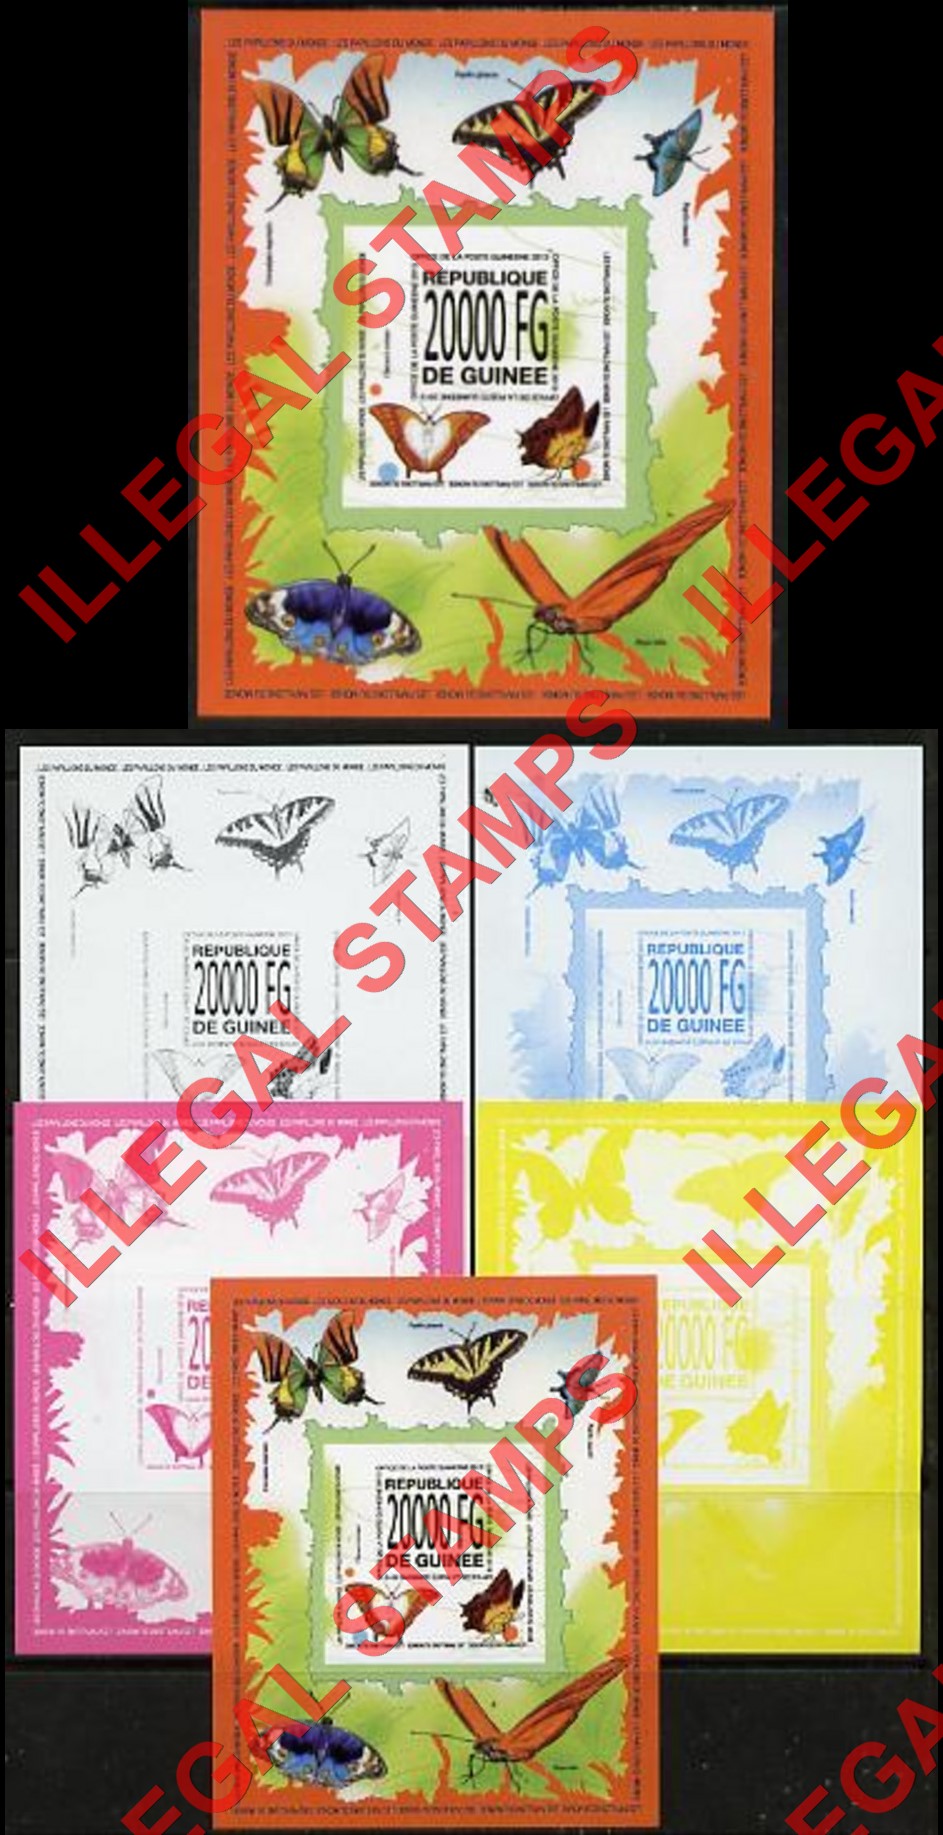 Guinea Republic 2013 Butterflies Counterfeit Illegal Stamp with Matching Color Proofs (Set 2)